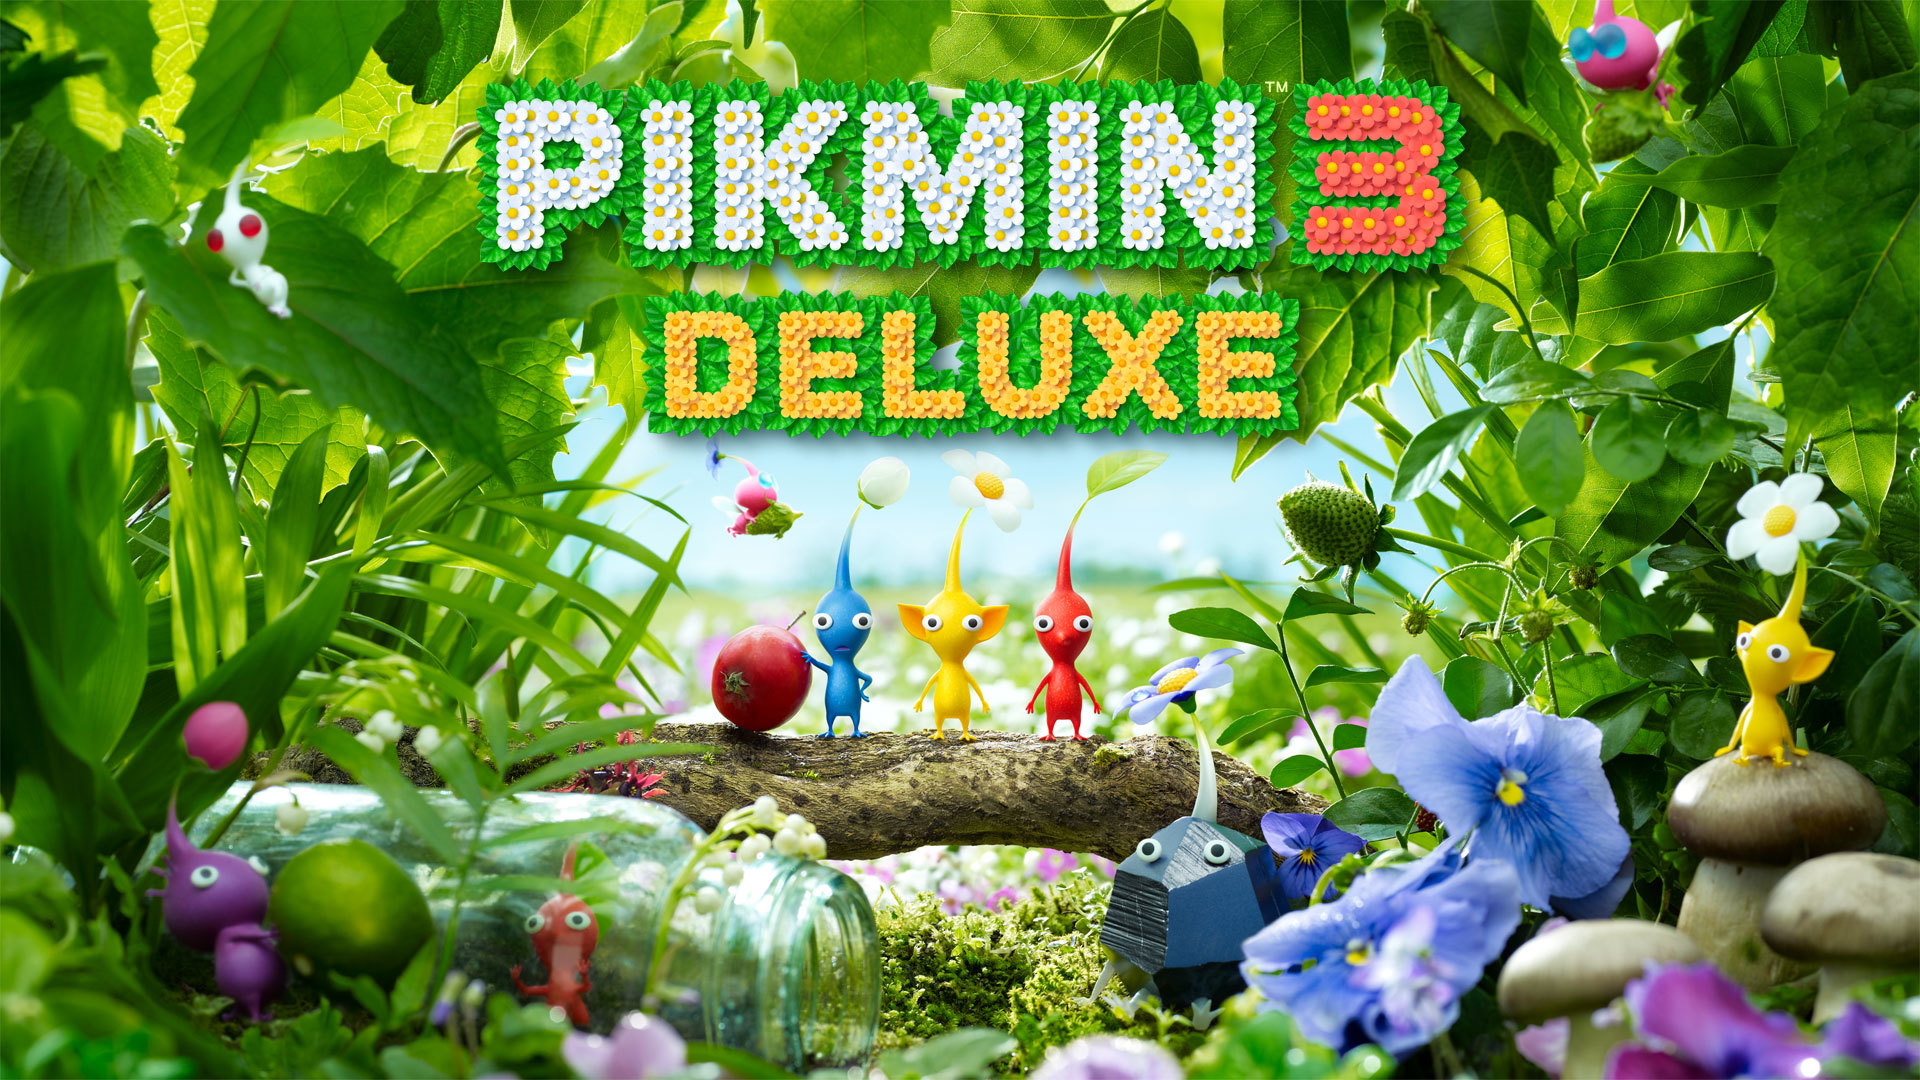 Pikmin 3 Deluxe coming to Switch on October 30